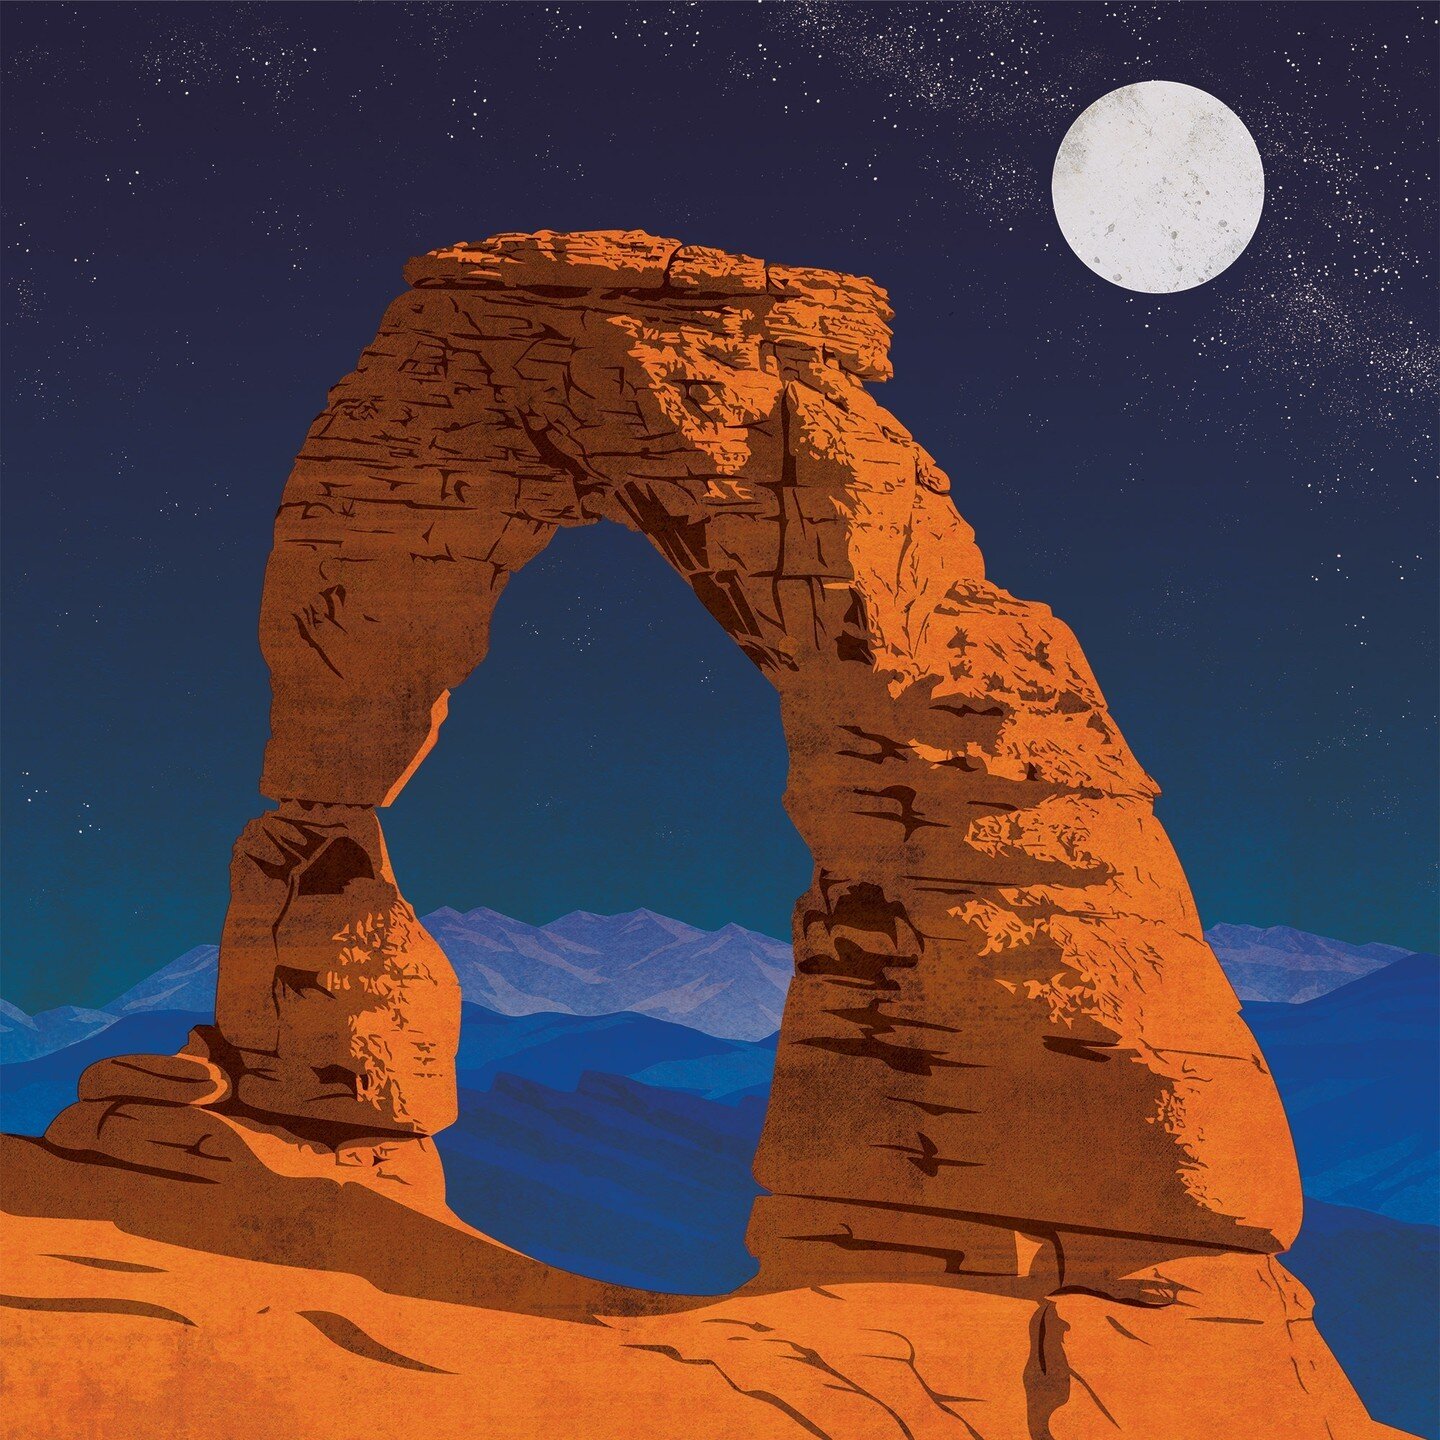 Detail of Delicate Arch in Arches National Park⁠
⁠
Prints available in my Etsy shop.